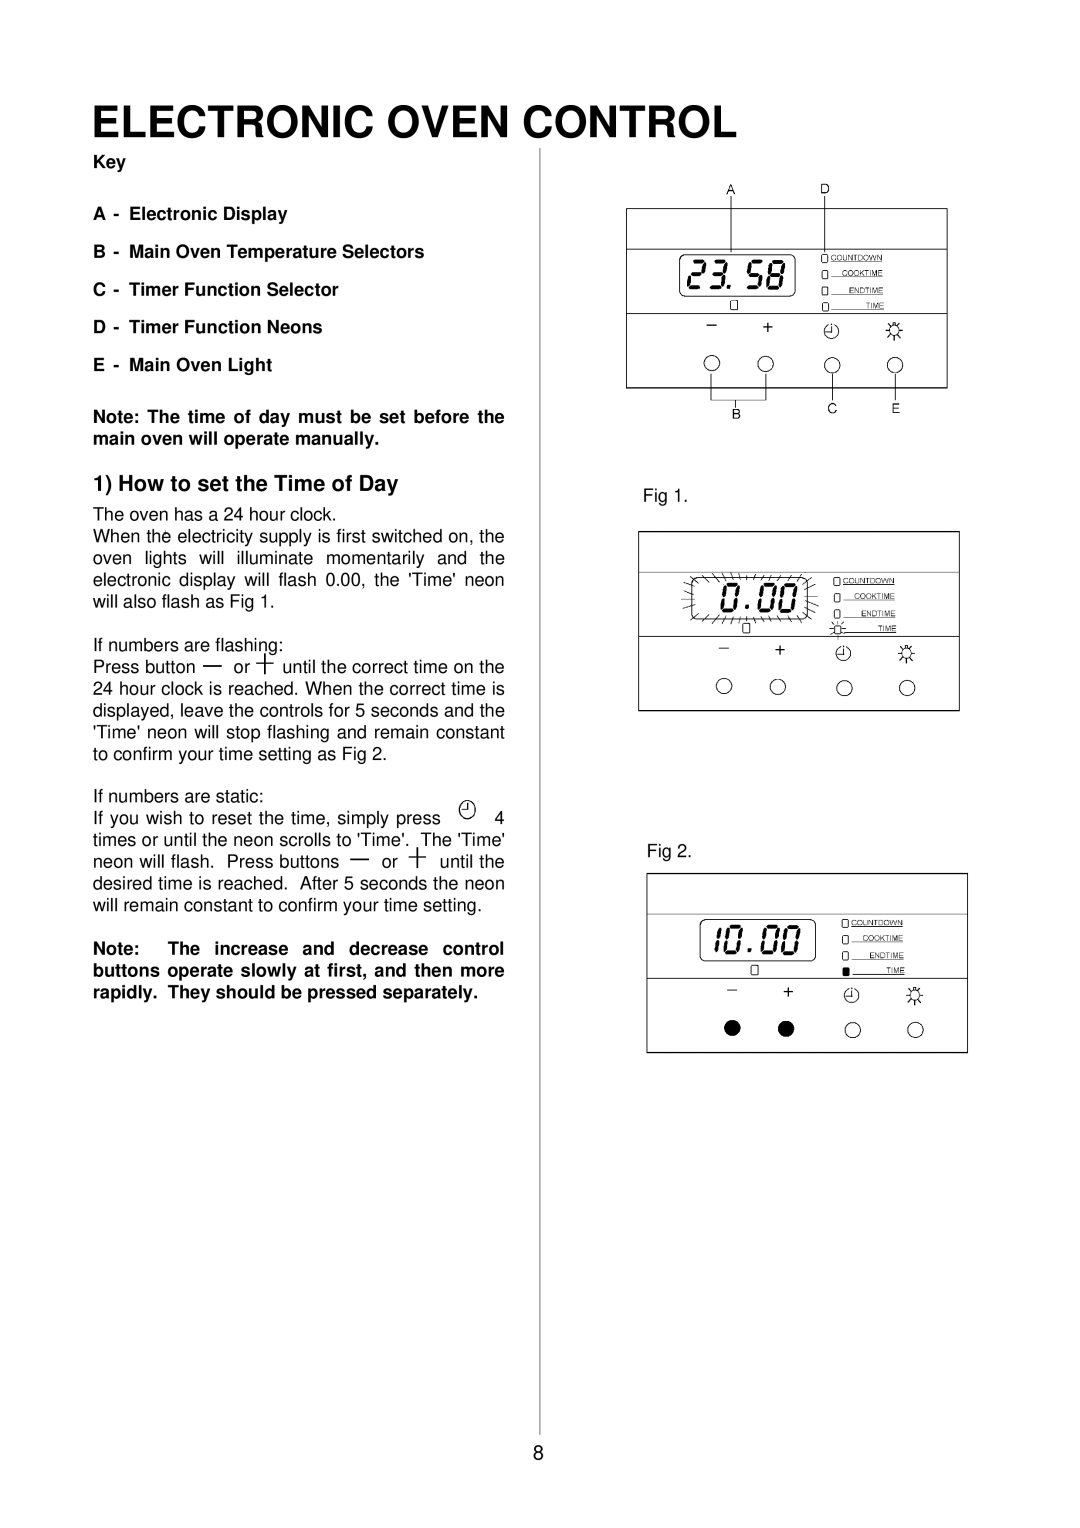 Electrolux D81000, D81005 installation instructions Electronic Oven Control, How to set the Time of Day 